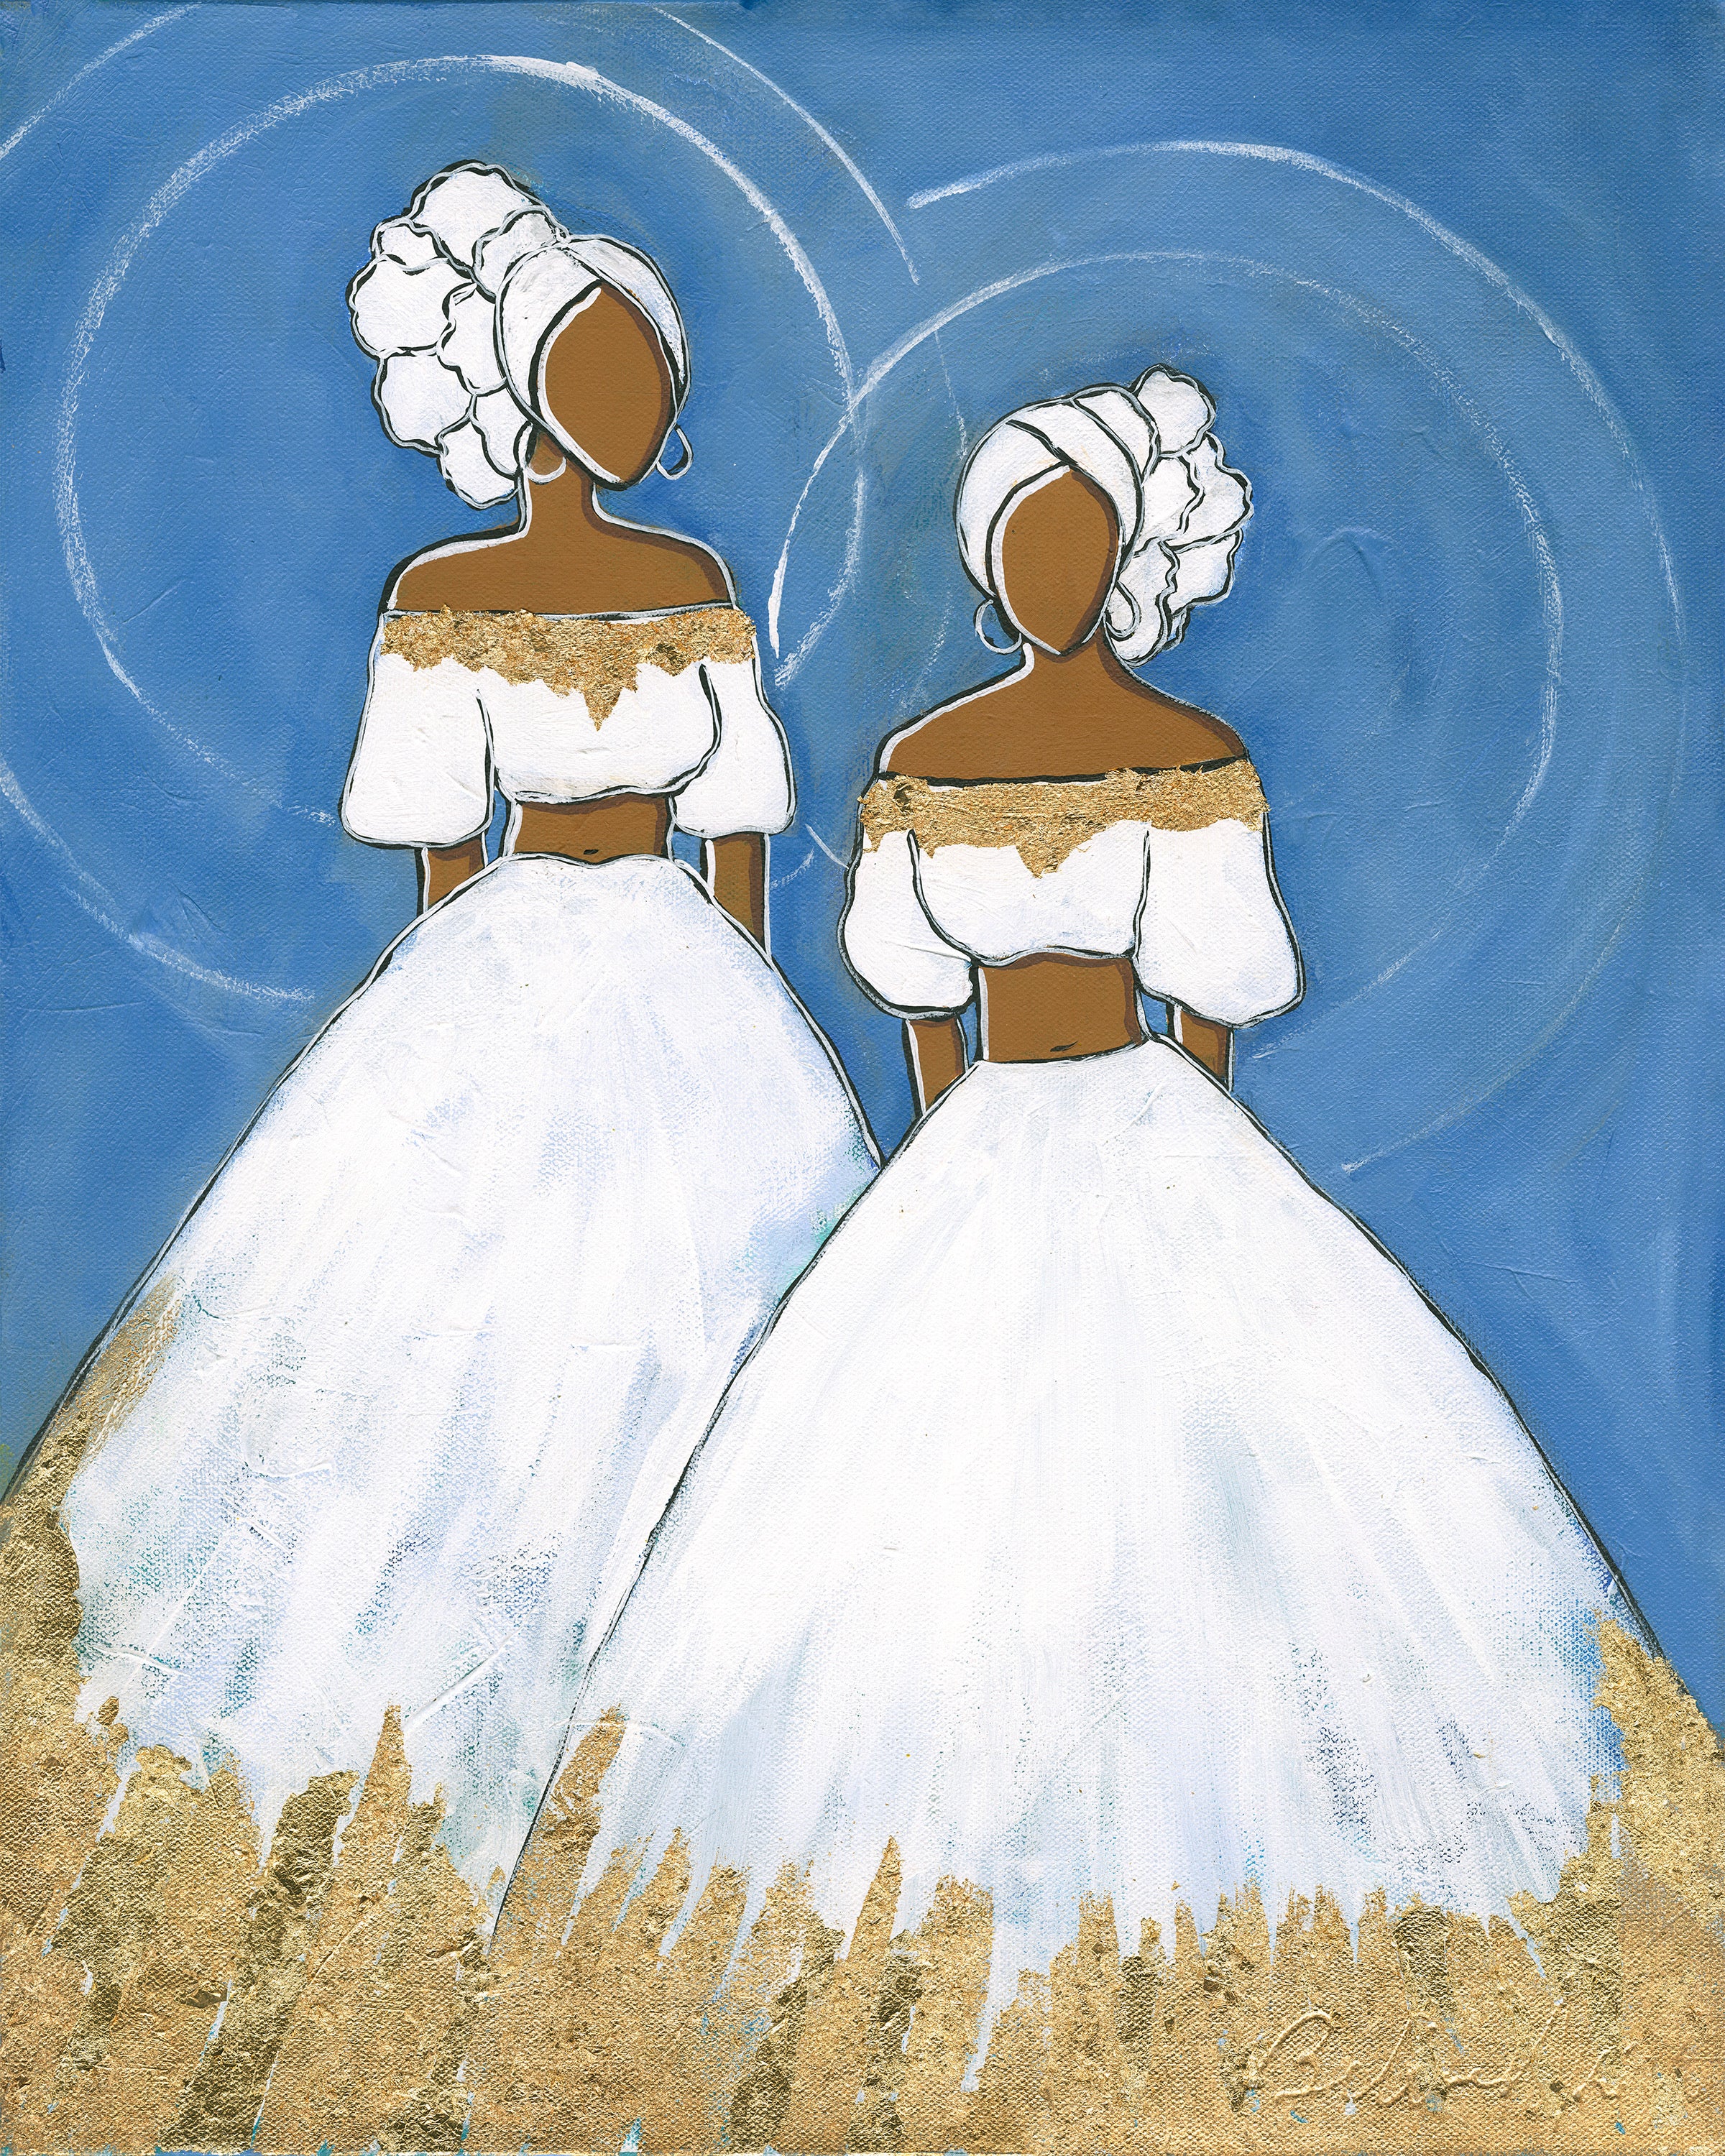 Caribbean Elegance: A Set of Two Faceless Art Paintings